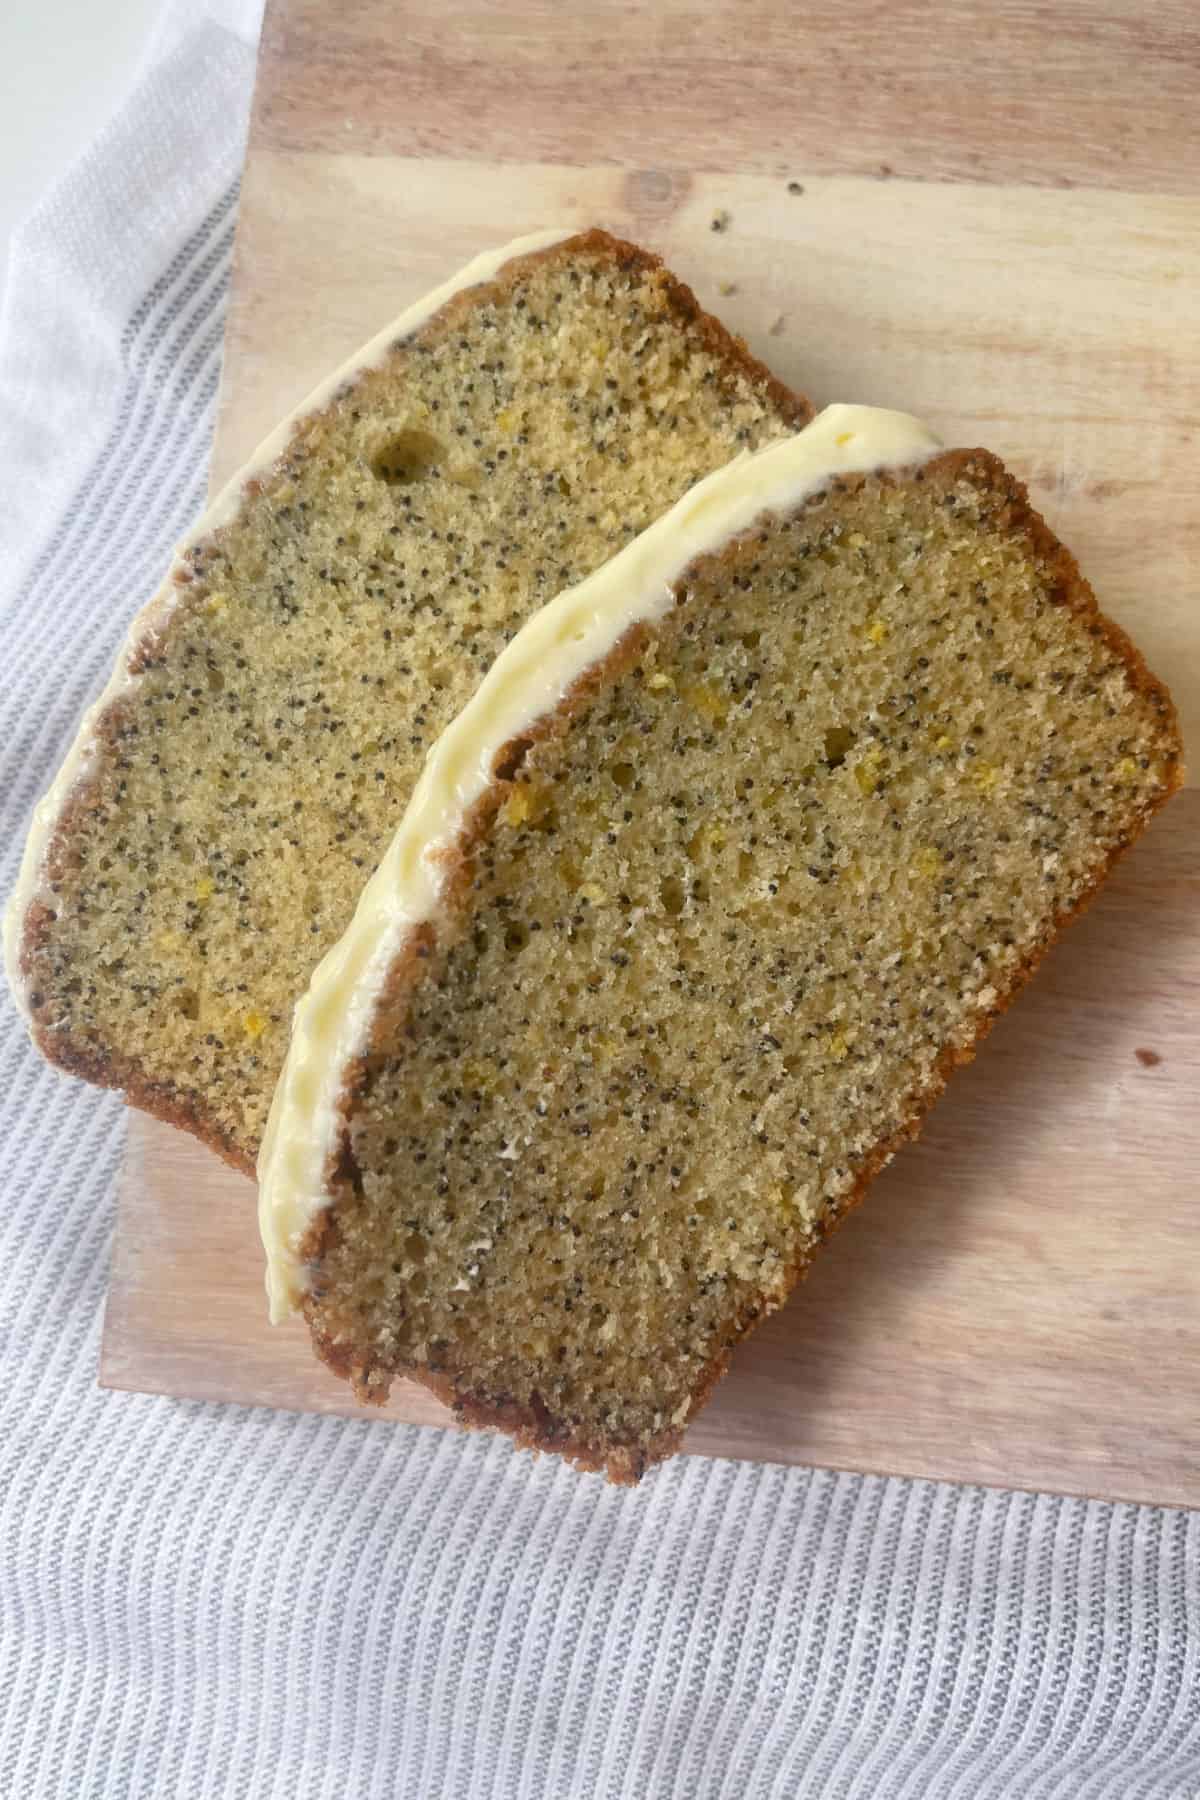 Overhead view of Lemon and Poppy Seed Cake Sliced and sitting on a pale timber serving board.